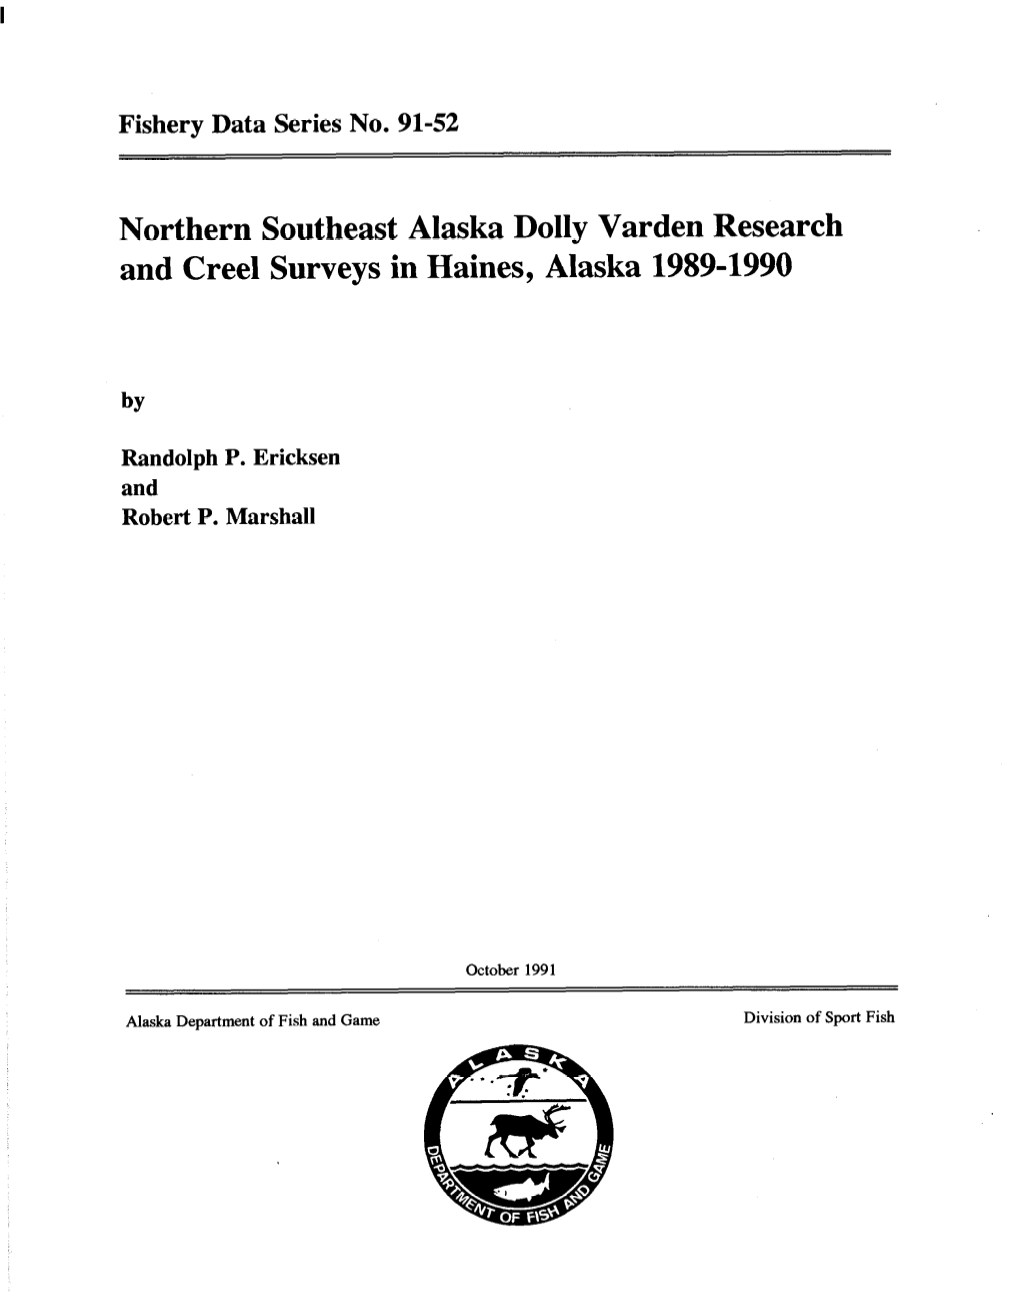 Northern Southeast Alaska Dolly Varden Research and Creel Surveys in Haines, Alaska 19894990